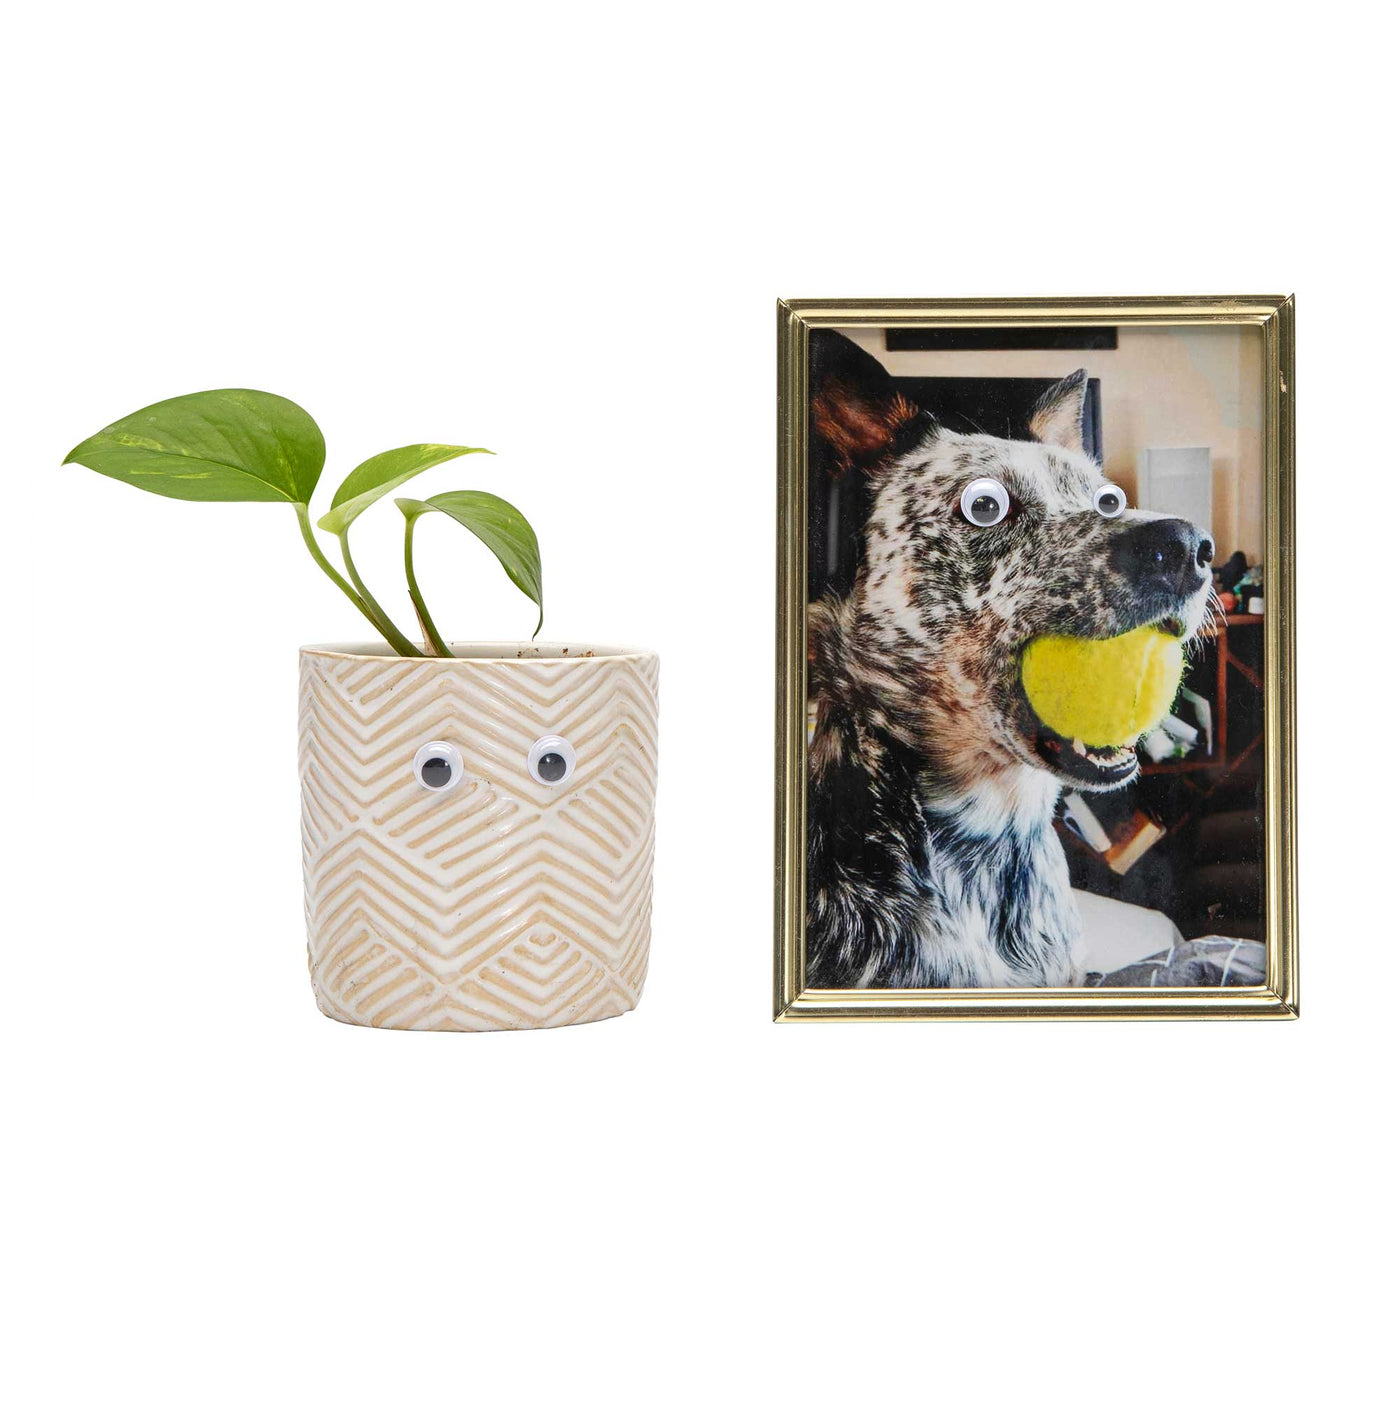 A plant and picture of a dog with Googly Eyes on them